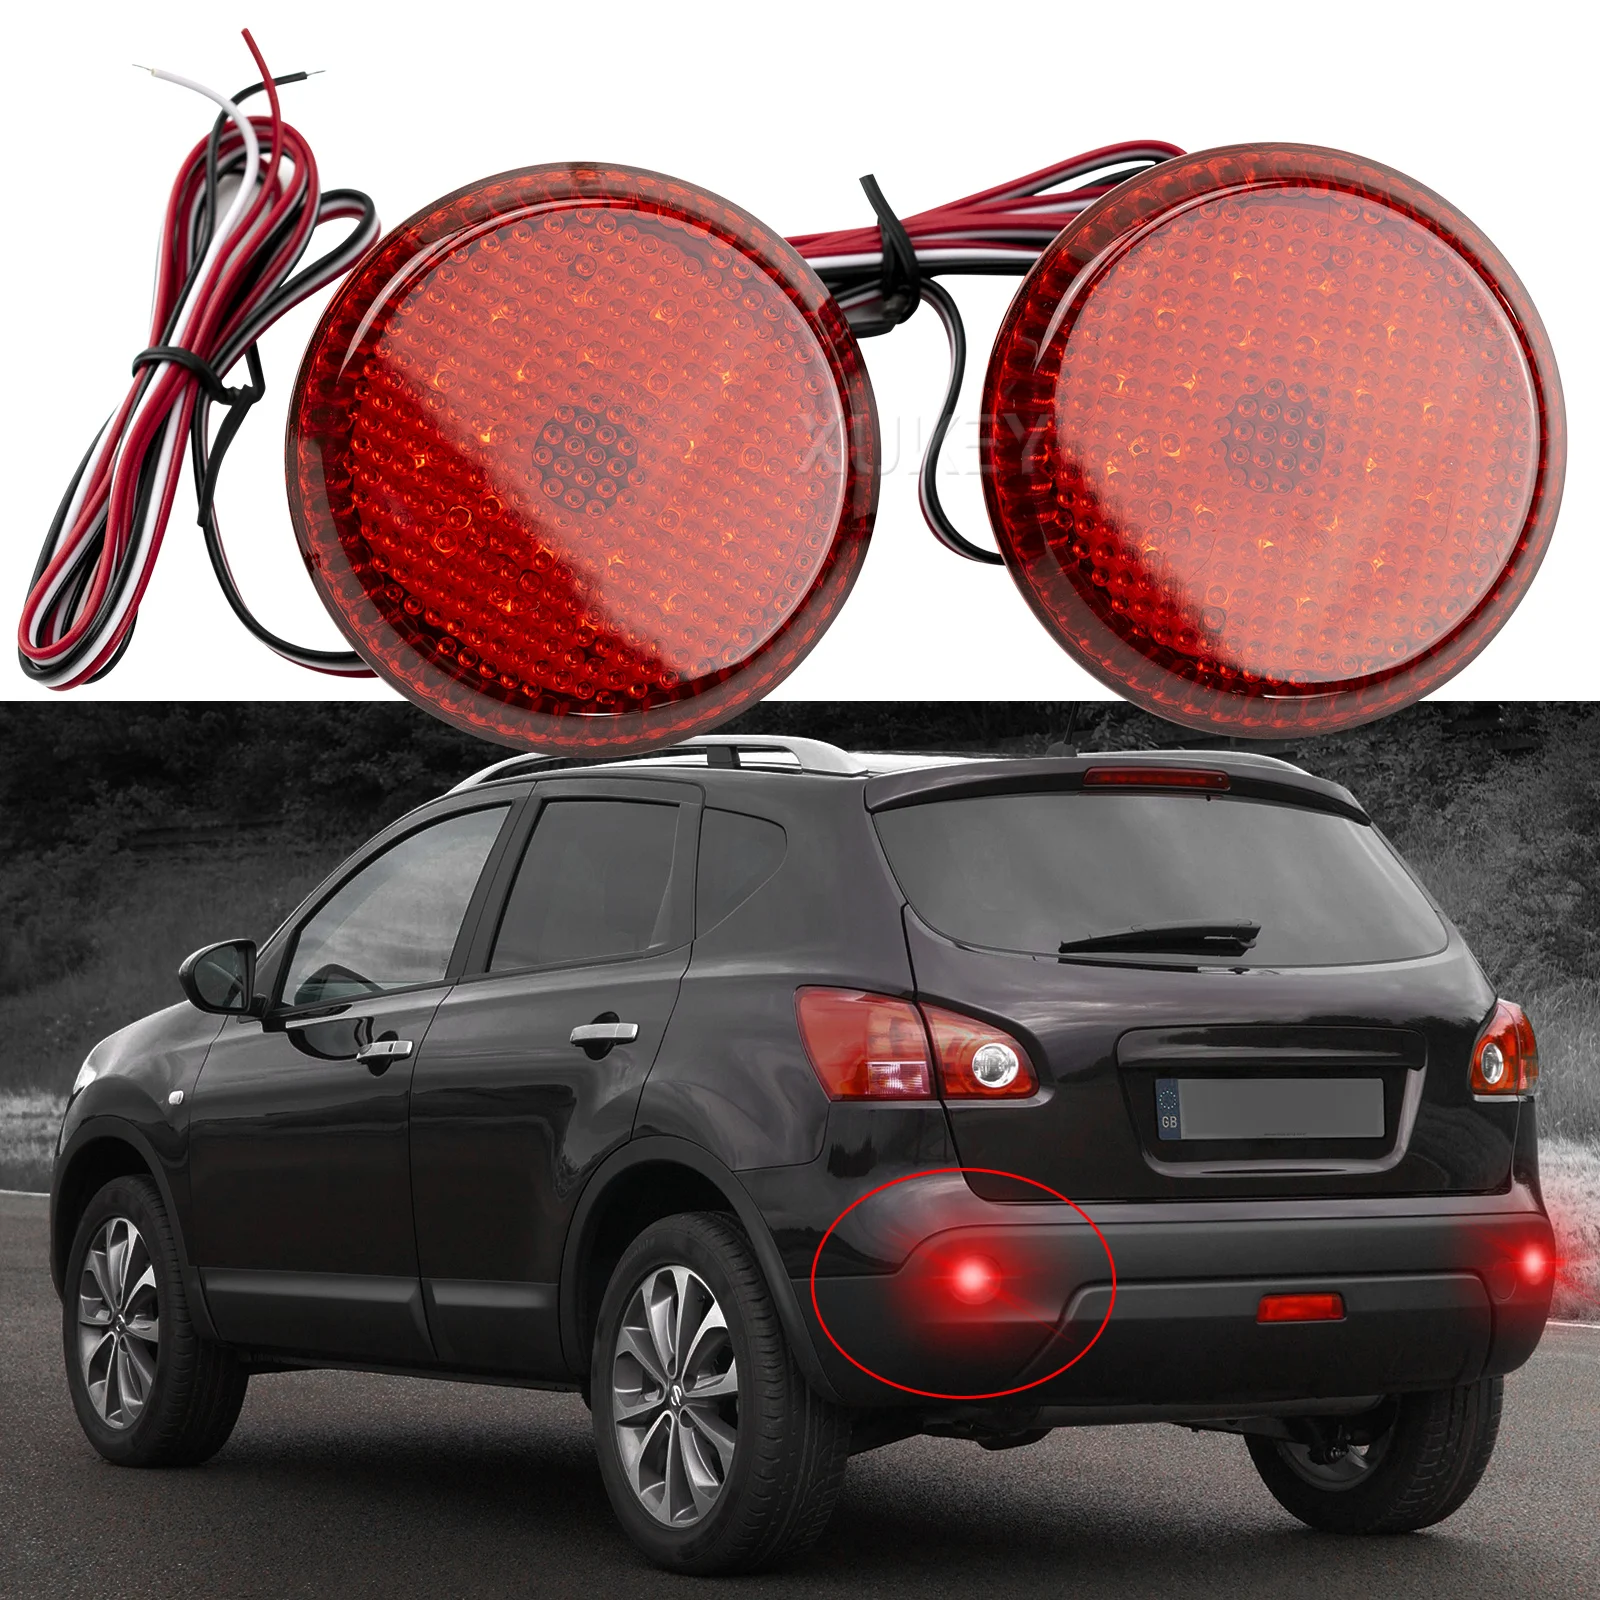 

2x Red LED Rear Bumper Reflector Lights Car Tail Lamps Brake Stop Light For Nissan Qashqai X-Trail T31 For Toyota Corolla Sienna